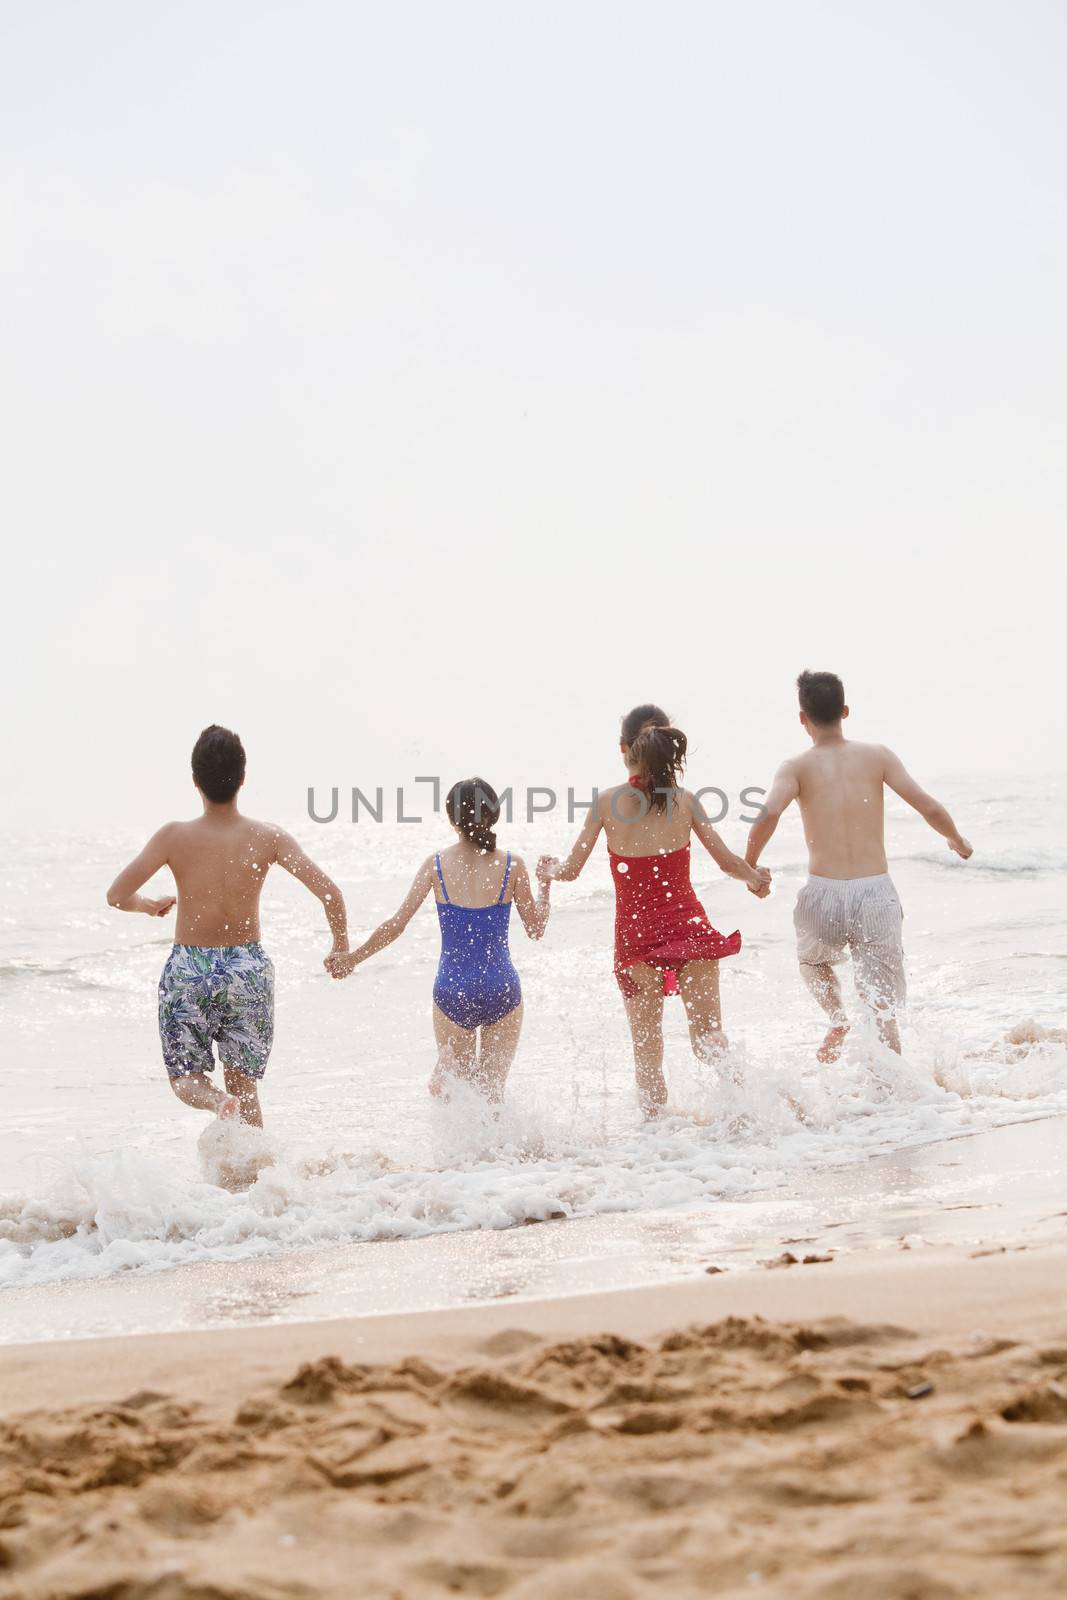 Four friends running into the water on a sandy beach, rear view by XiXinXing